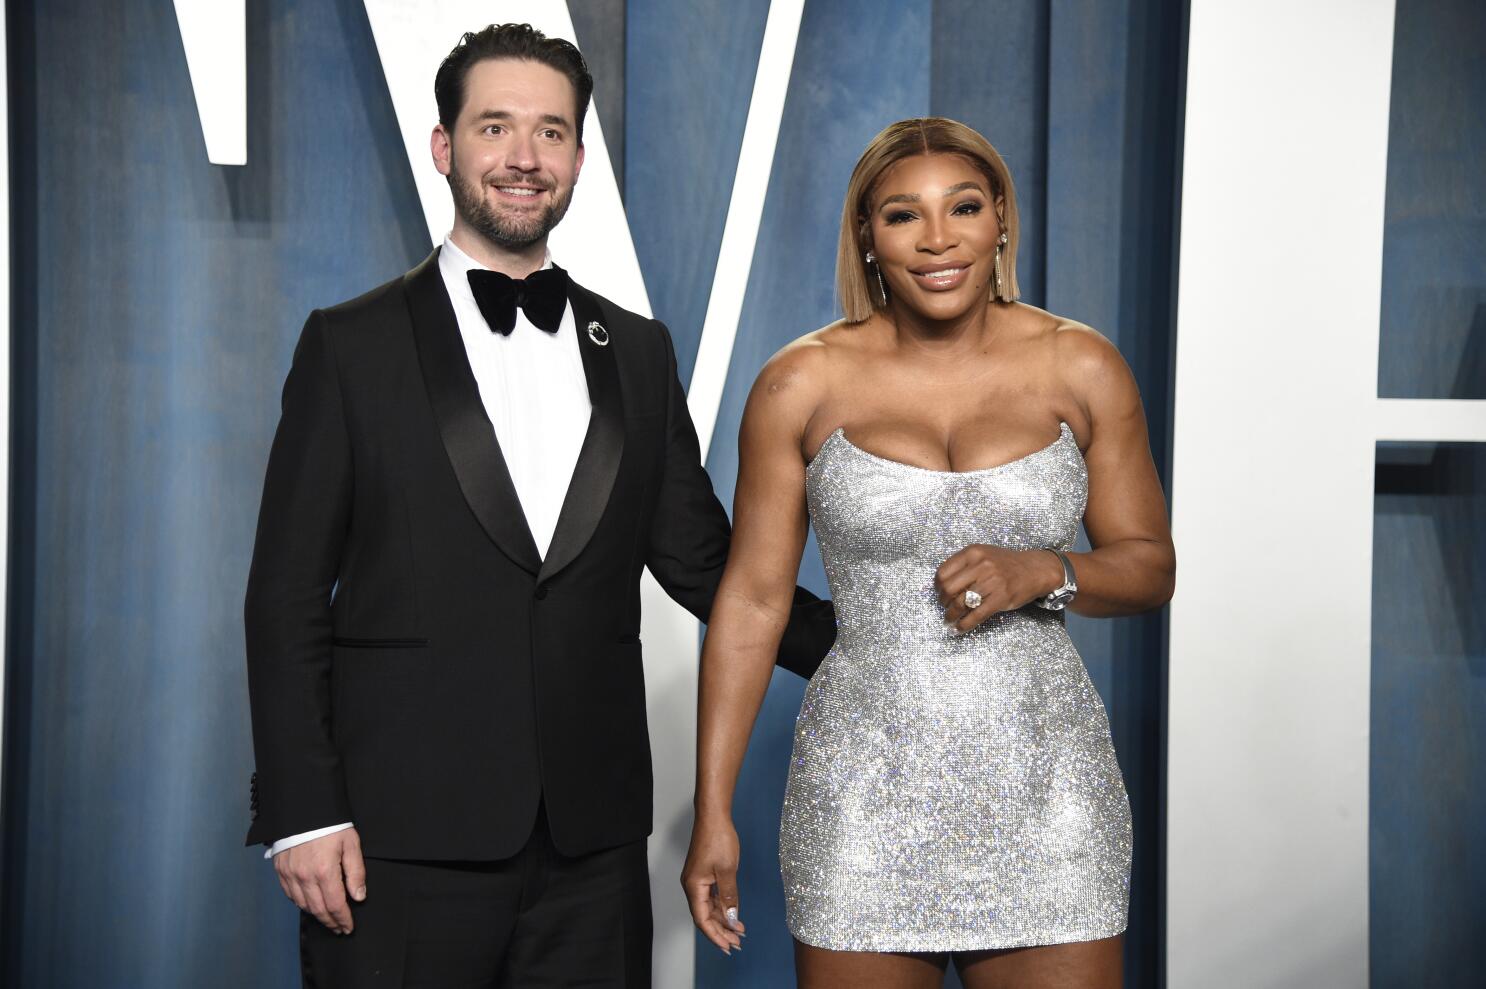 Serena Williams on Her Pregnancy, Finding Love, and More